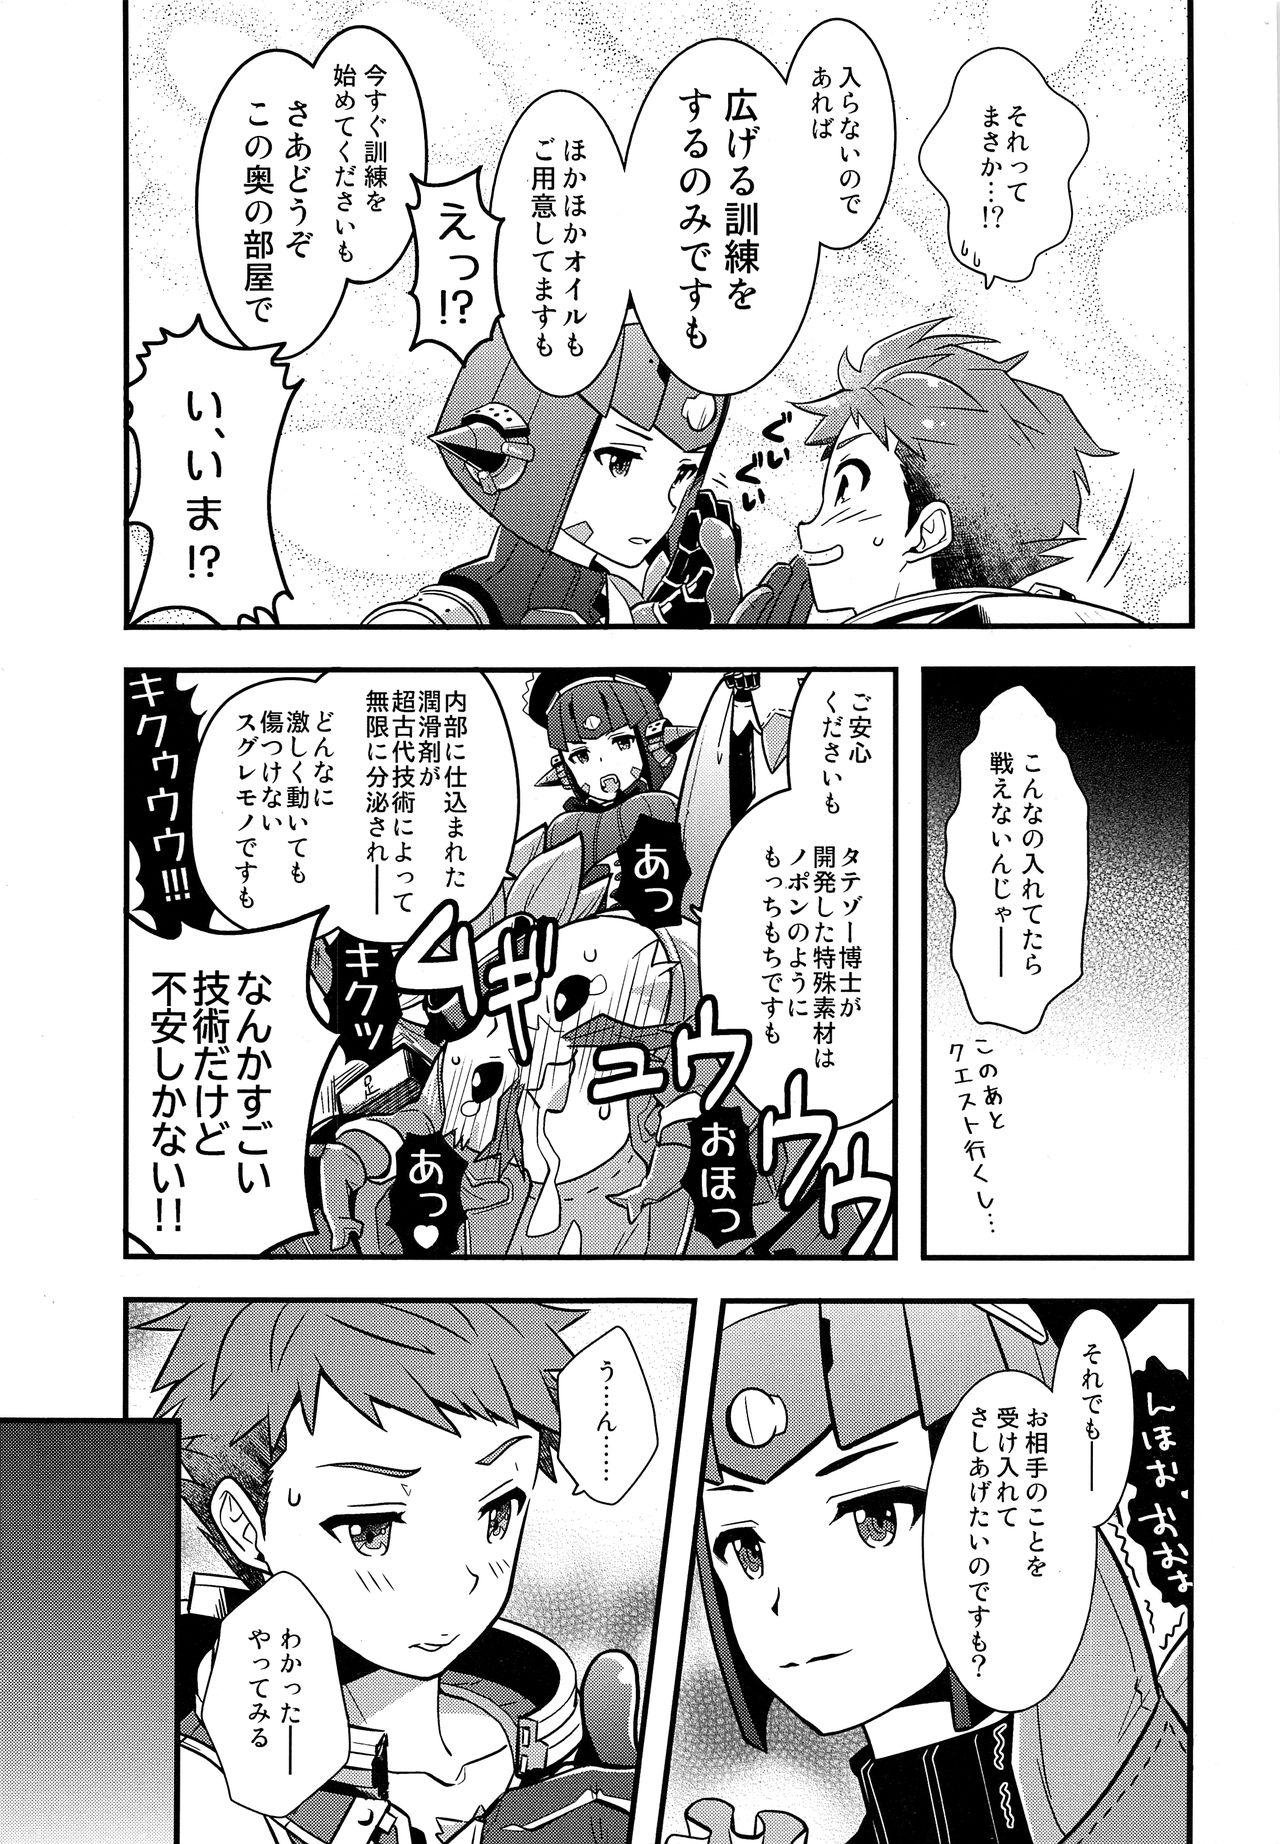 Cavalgando Keep Out Noponic - Xenoblade chronicles 2 Massage Sex - Page 8